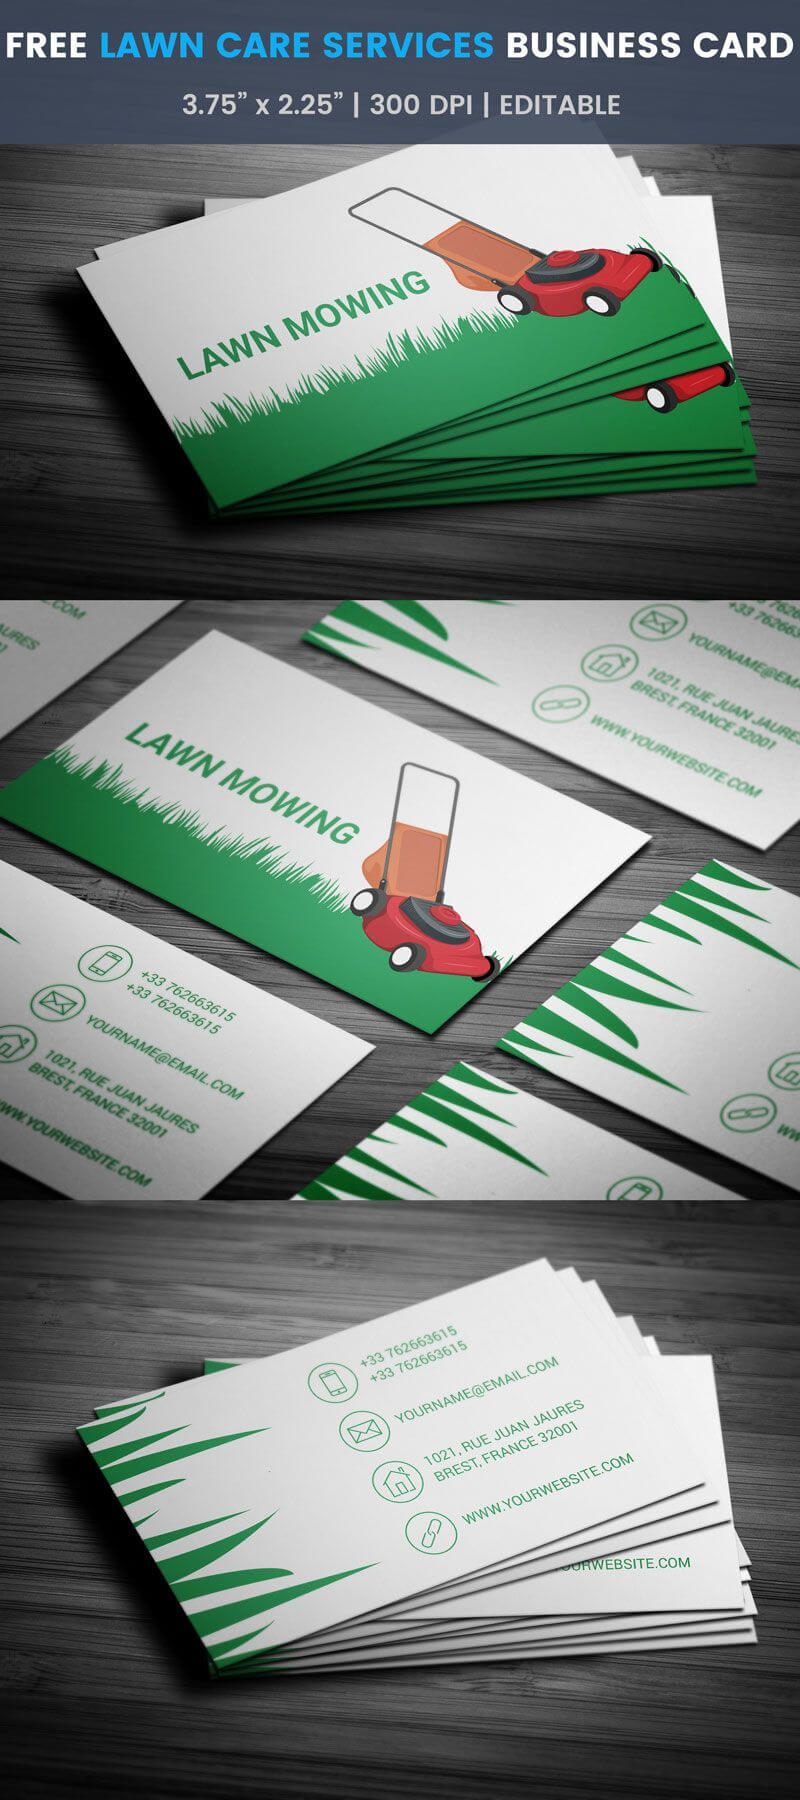 Lawn Care Services Business Card – Full Preview | Free Intended For Lawn Care Business Cards Templates Free